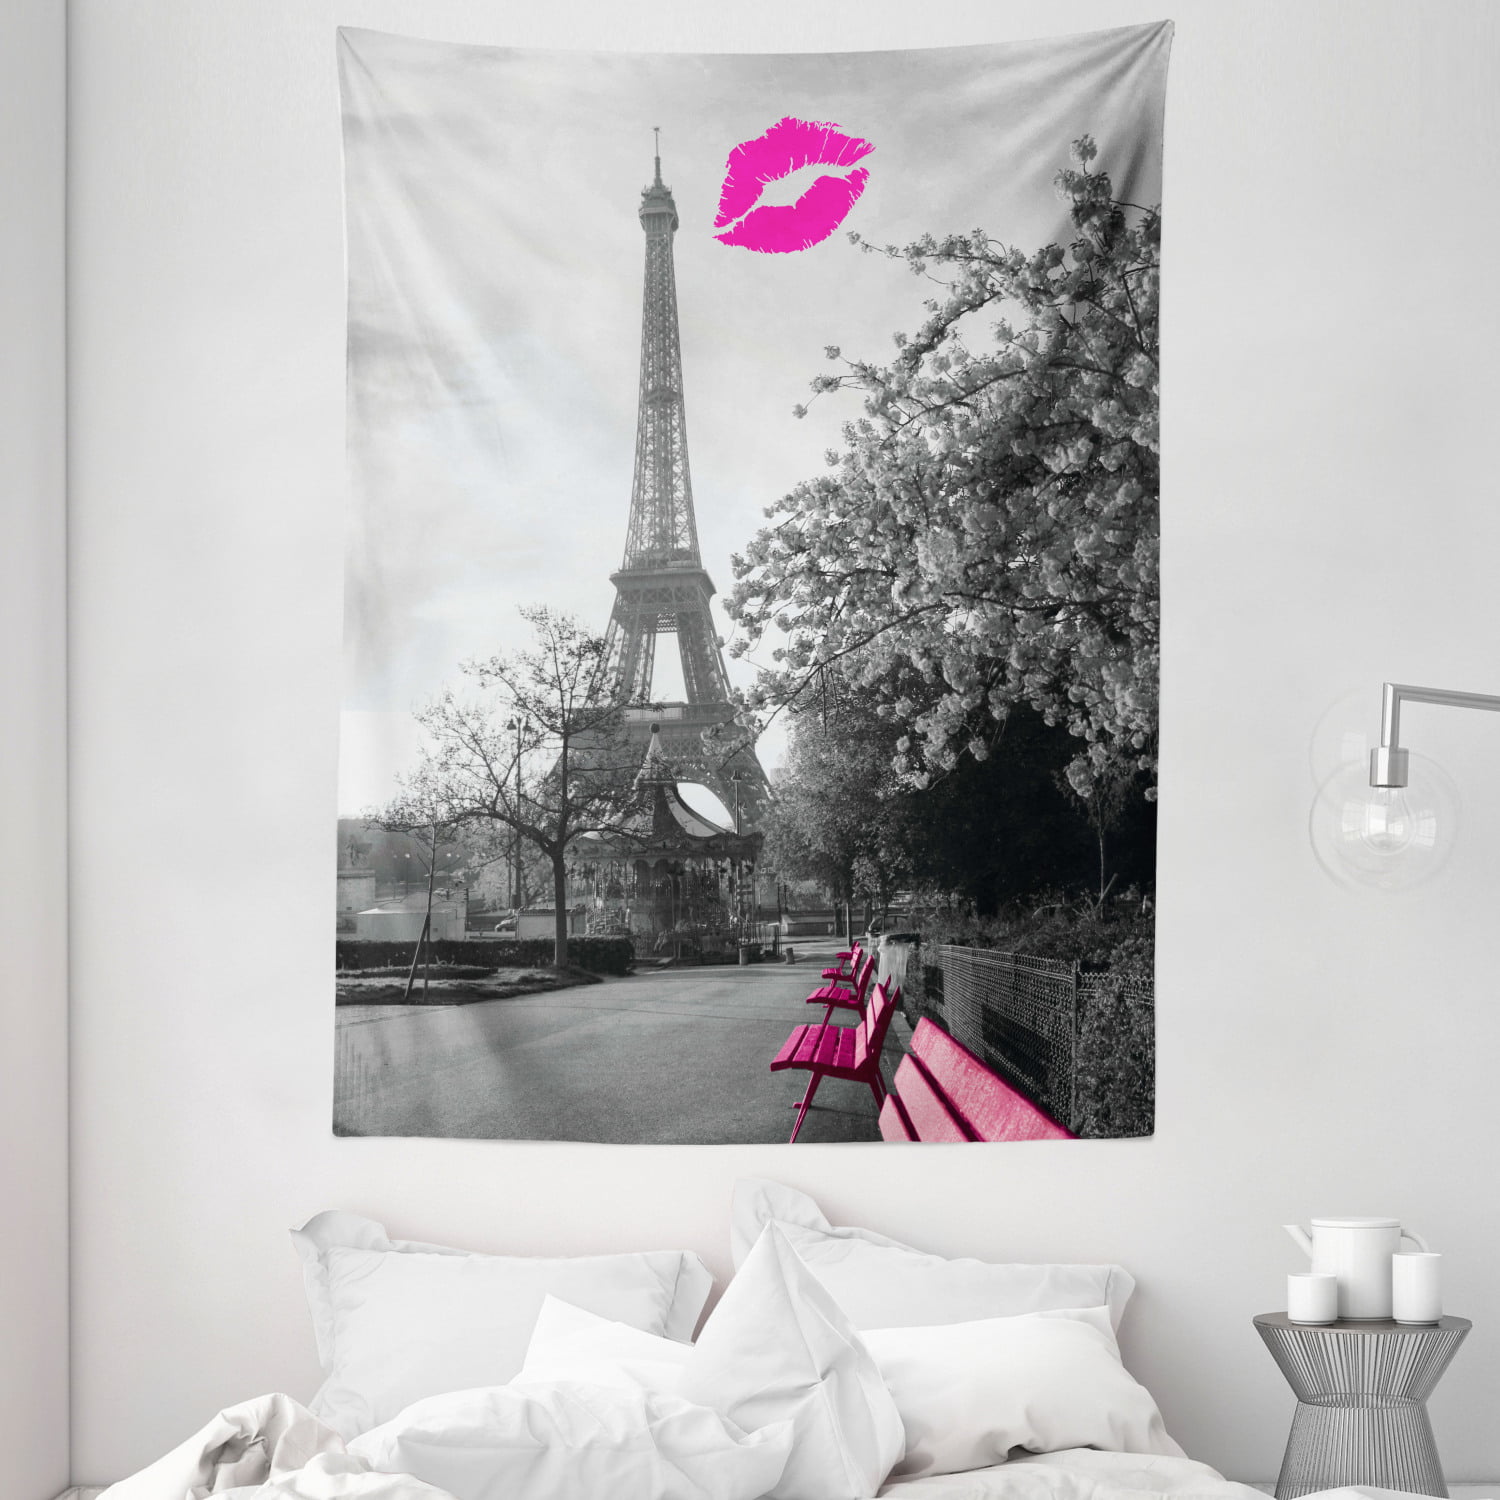 Eiffel Tower Paris Tapestry Wall Hanging for Living Room Bedroom Dorm Decor 